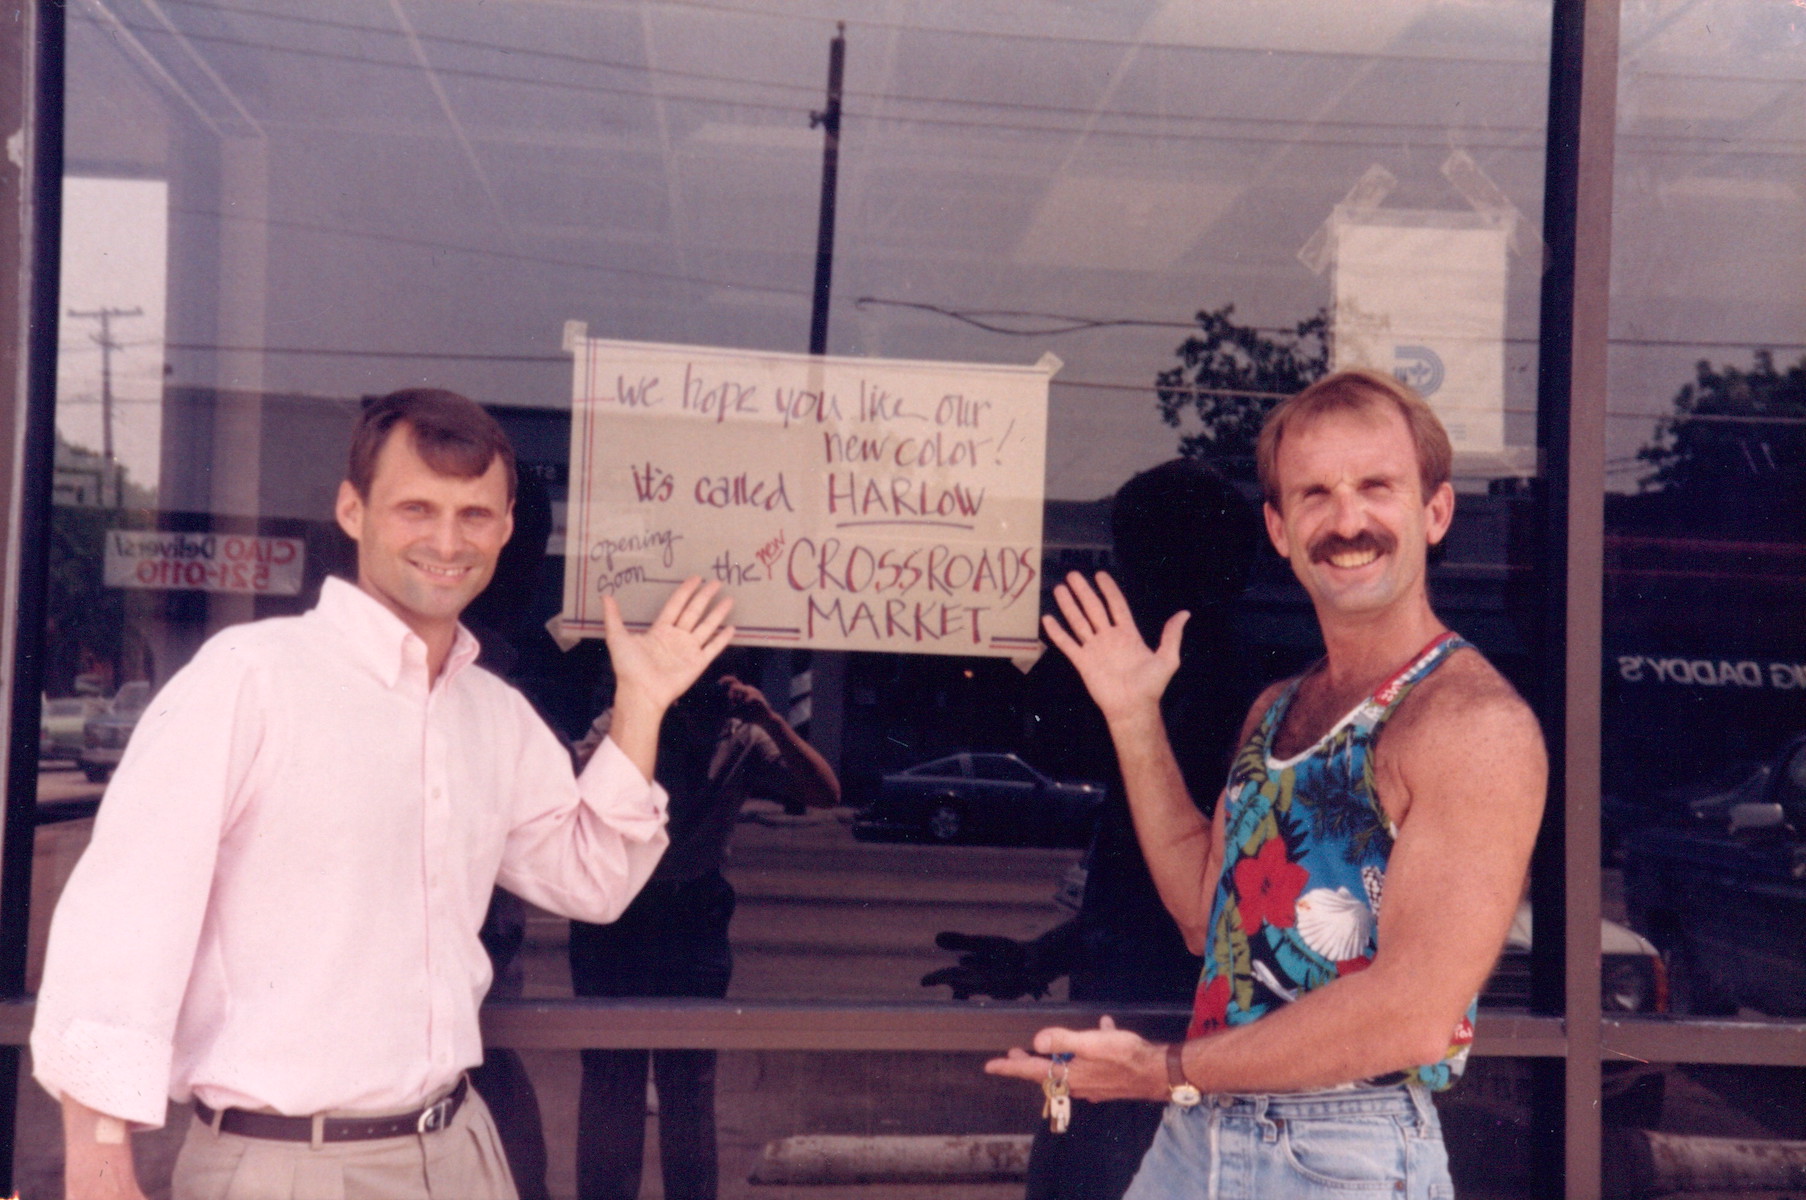 Terry Tebedo and Bill Nelson, William’s close friends and business partners, announcing the new interior color (“Harlow”) of the Crossroads Market (William’s store) after the devastating fire that burned it to the ground, Dallas, TX, circa 1986. William shares, “that same year, Terry was diagnosed with AIDS-related non-Hodgins’ Lymphoma. Terry died in 1988, and Bill died two years later. We started the store with 12 gay men. By 1990, only three survived.” Photo courtesy of William Waybourn.